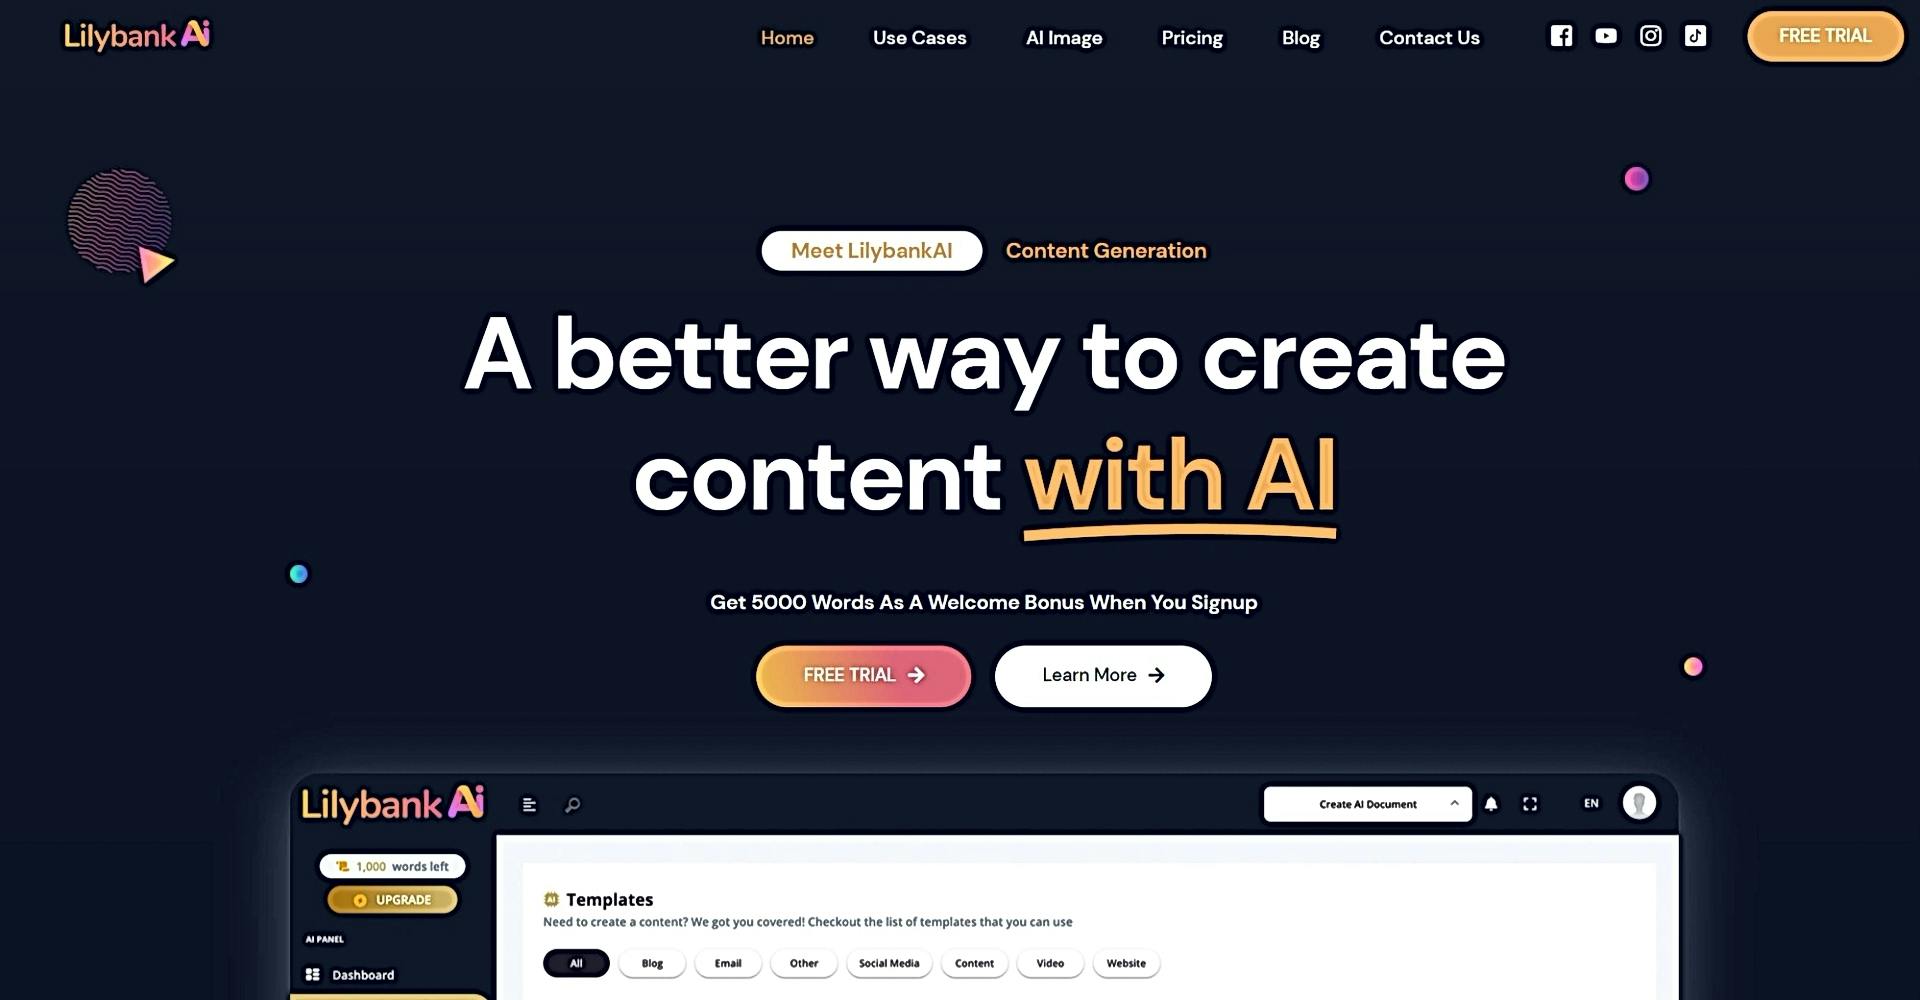 Lilybank AI featured